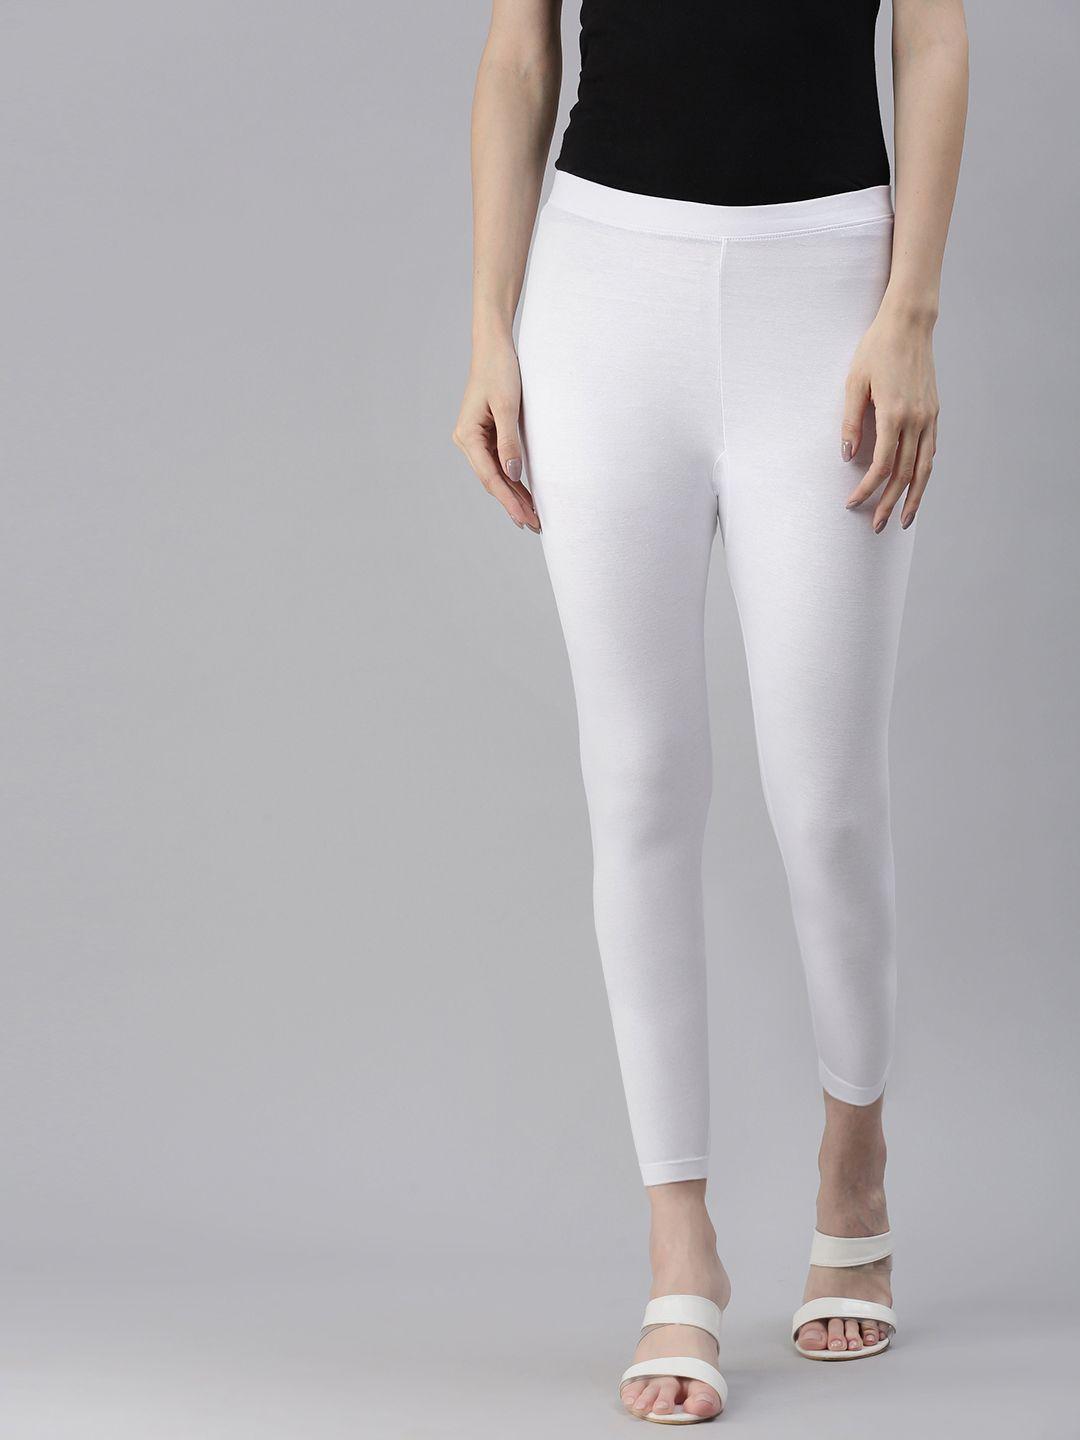 kryptic-women-off-white-solid-cotton-three-fourth-length-leggings